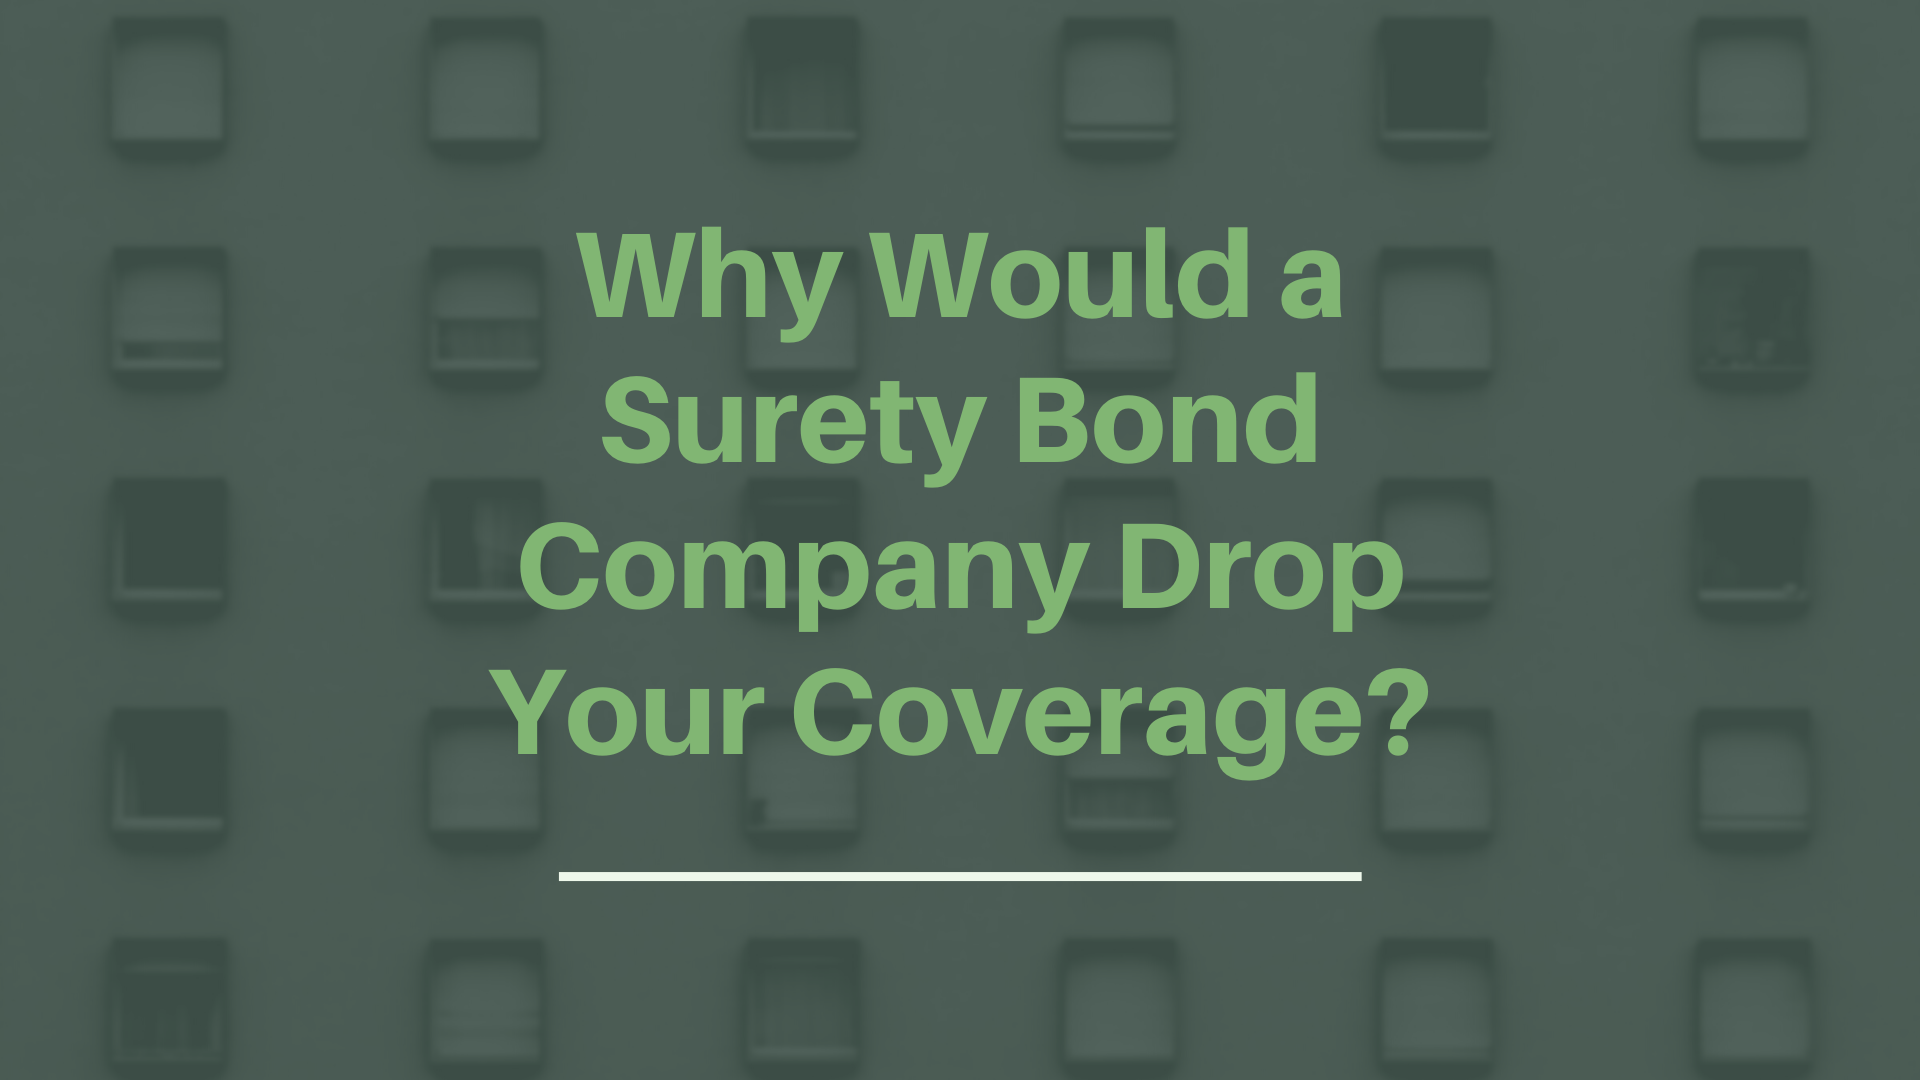 surety bond - Can I get a refund if the surety bond company drops my coverage - building with a loot of windows